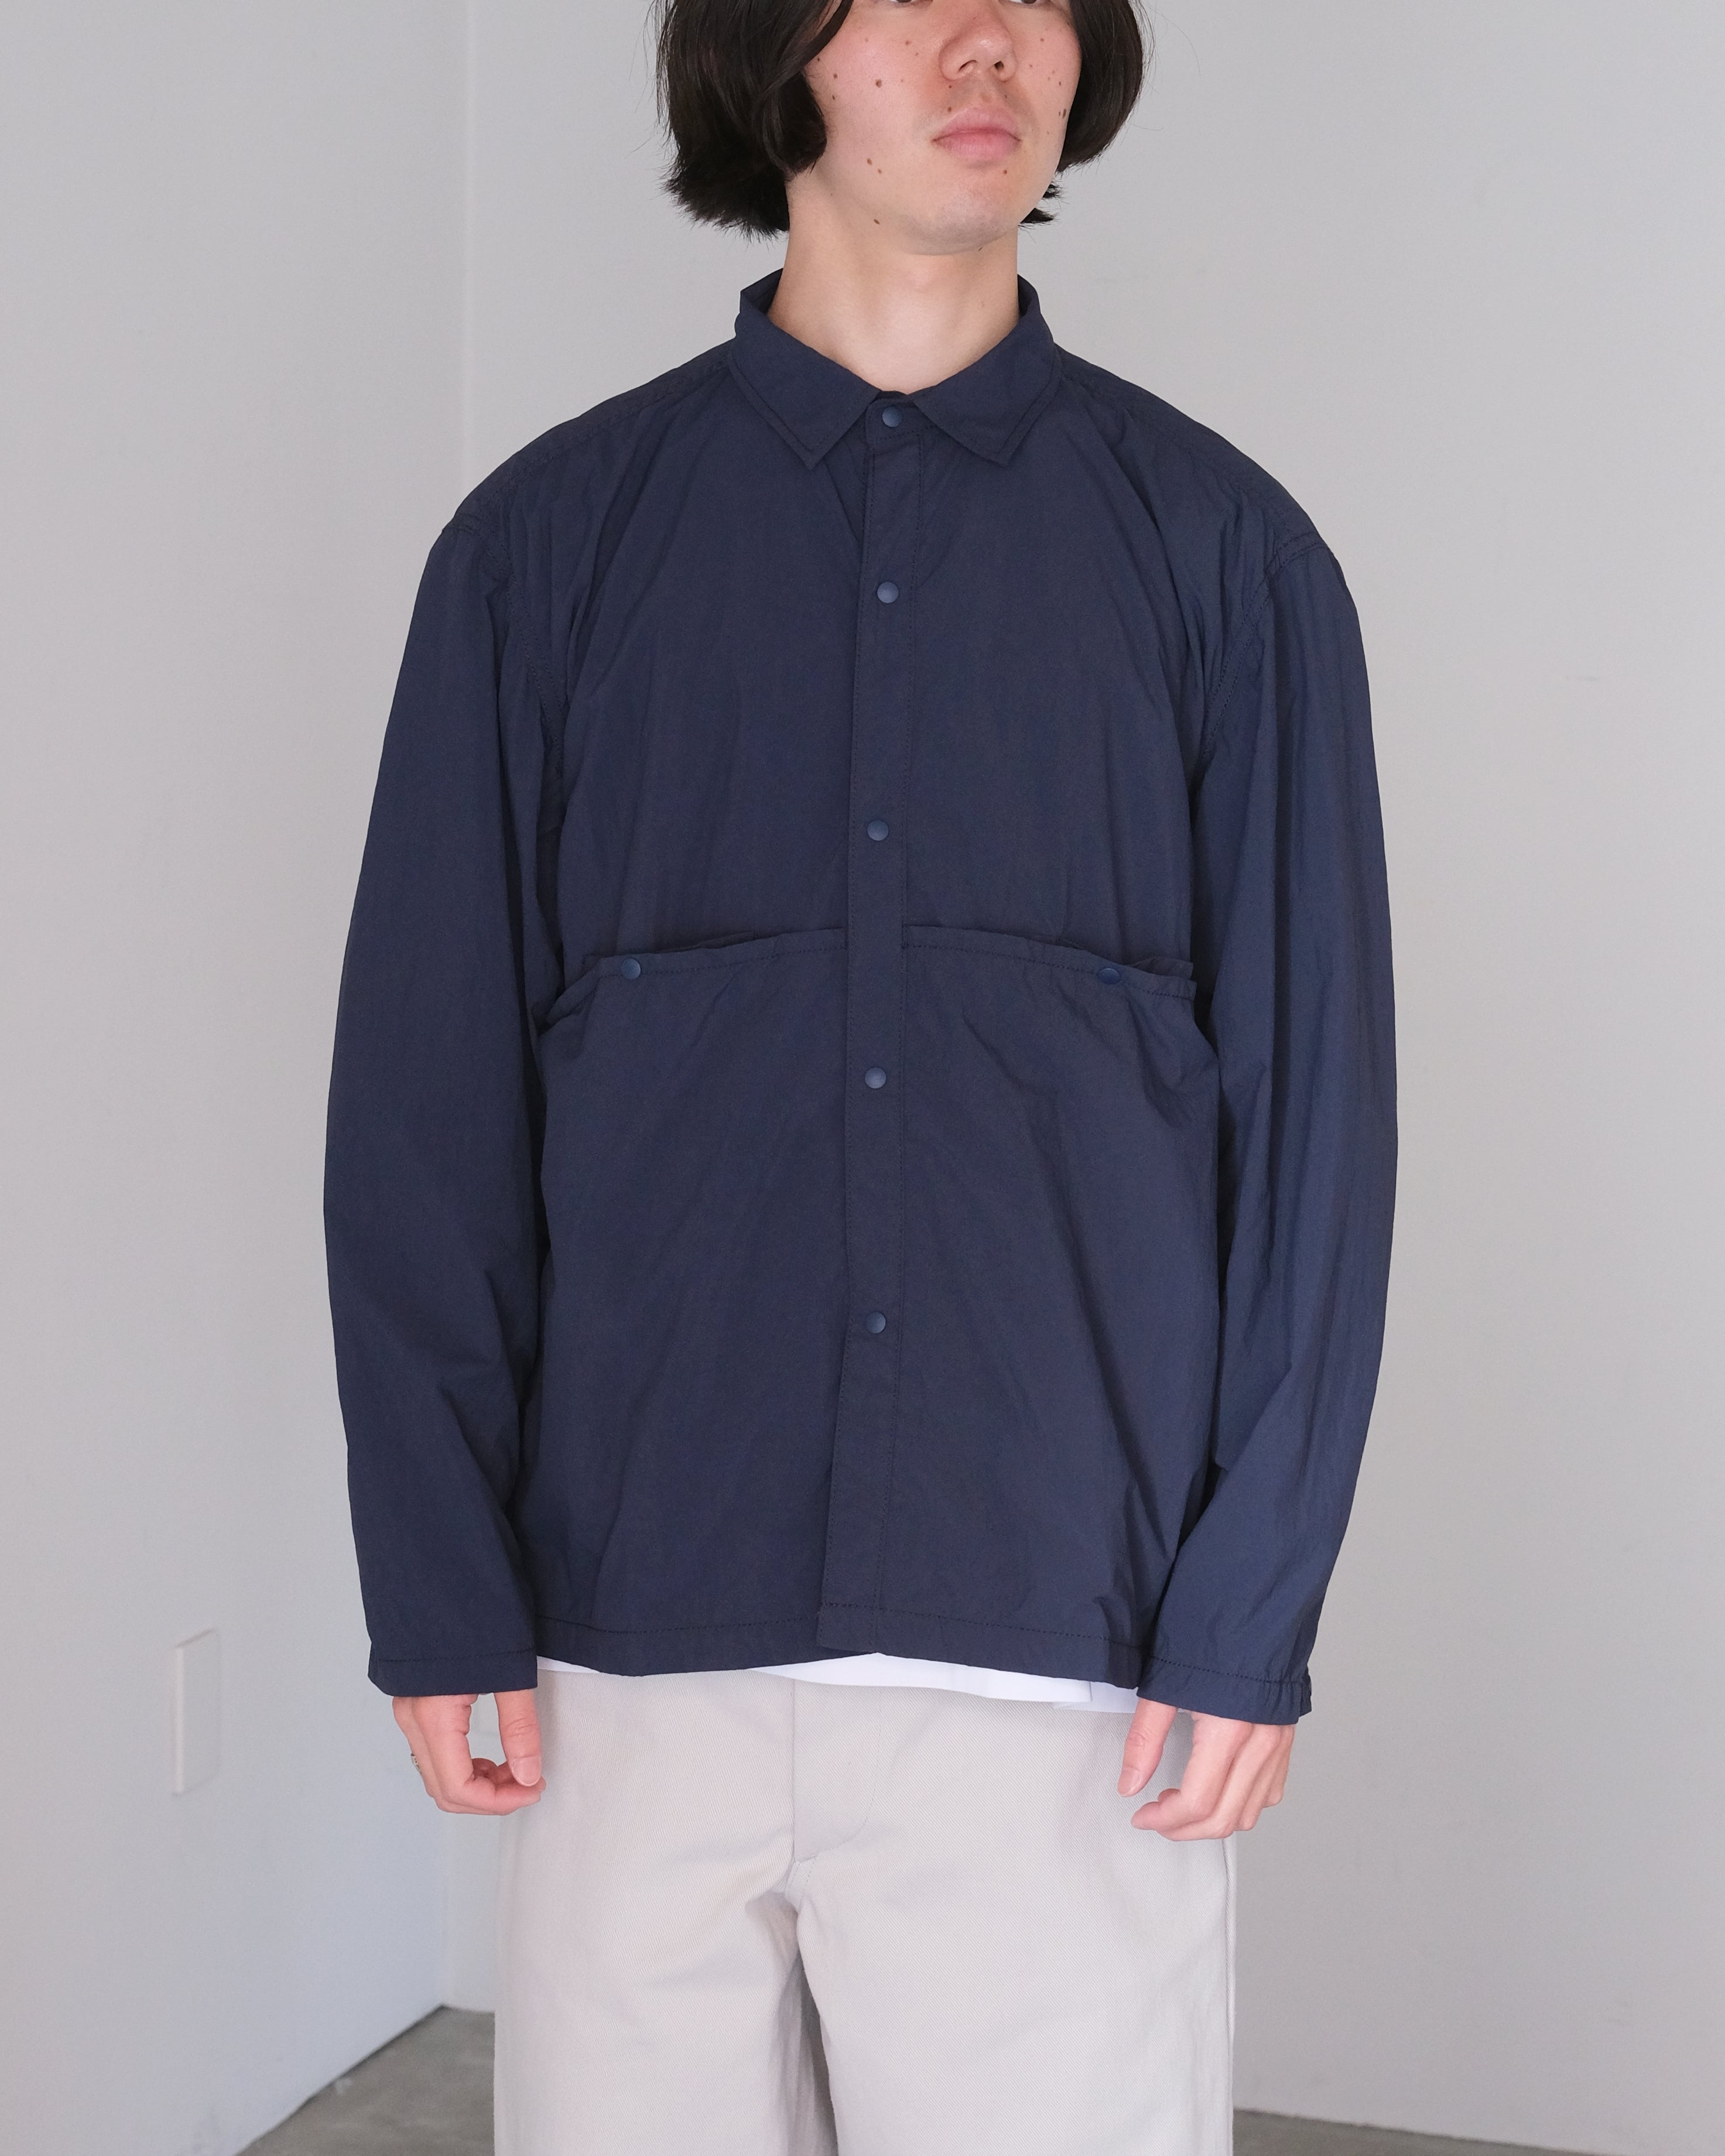 ENDS and MEANS/Light Shirts Jacket 